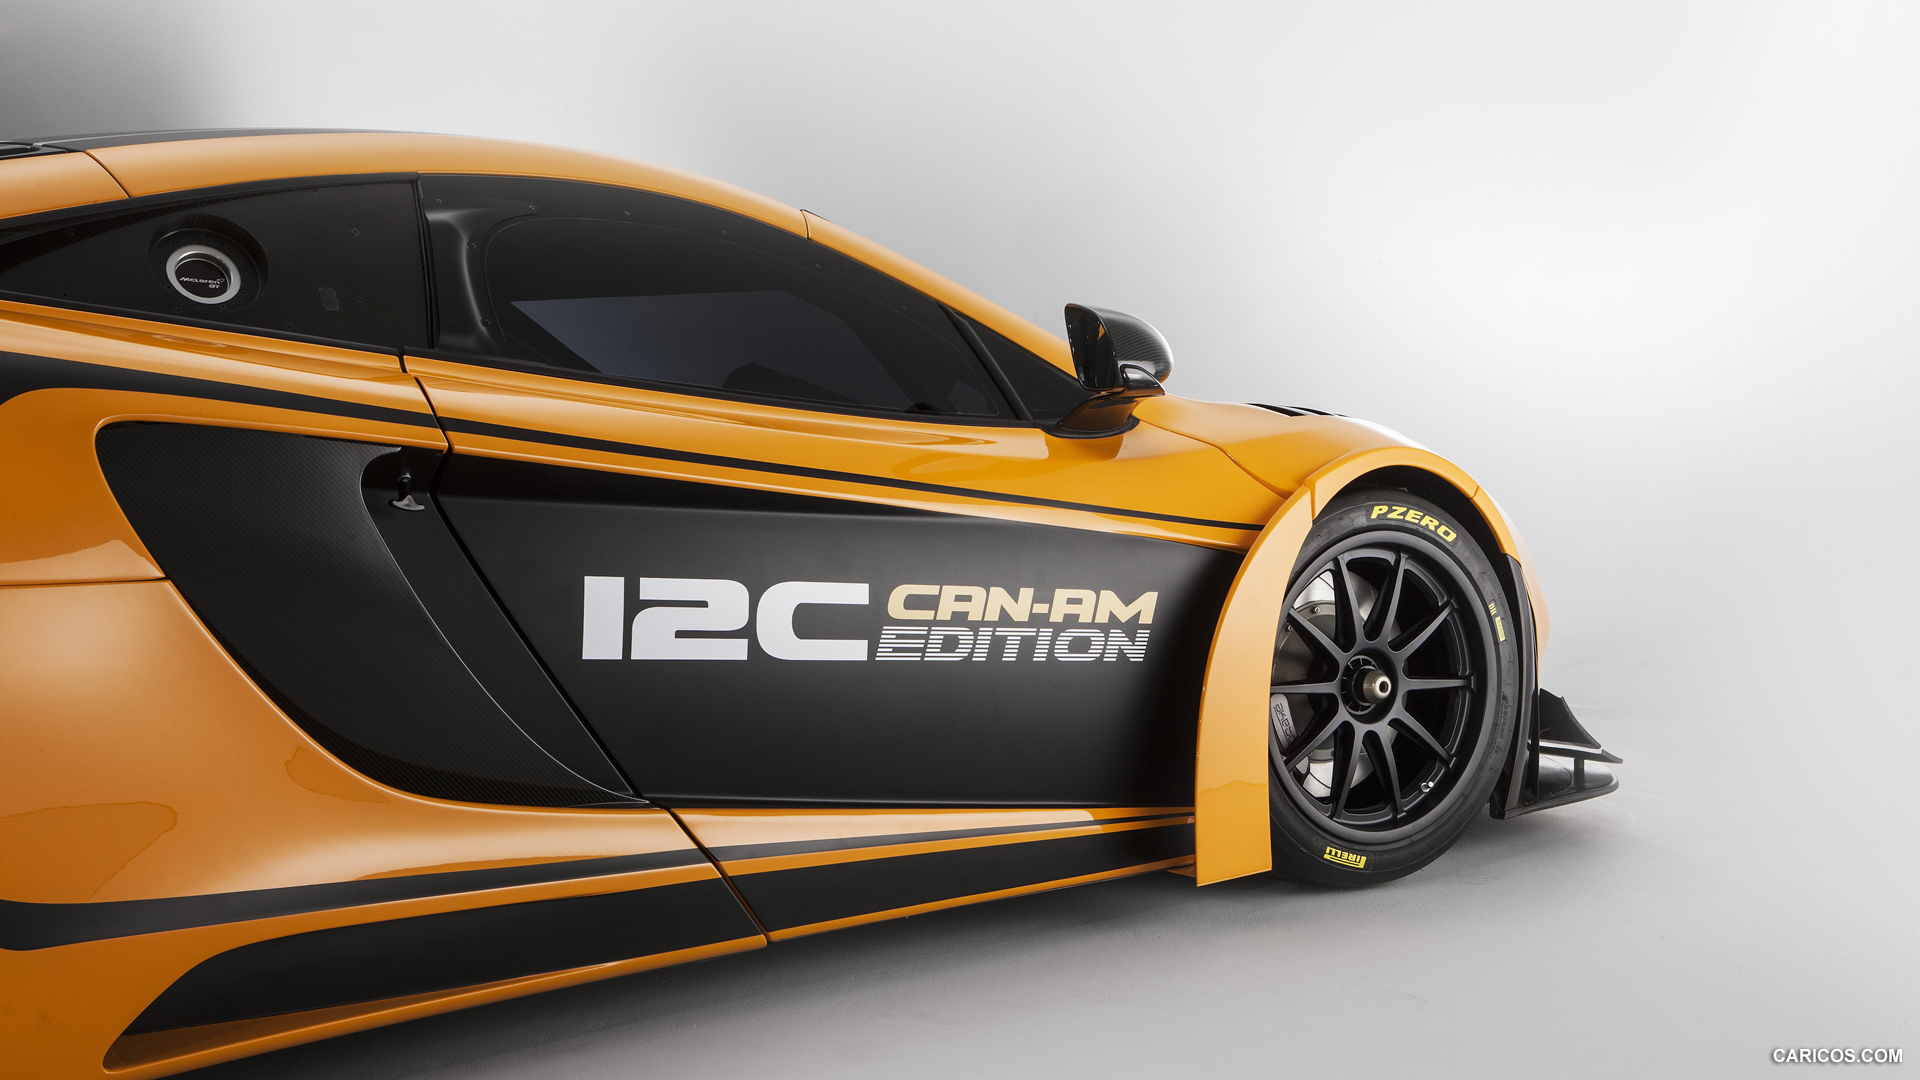 2012 McLaren 12C Can-Am Edition Racing Concept  - Side, #11 of 17